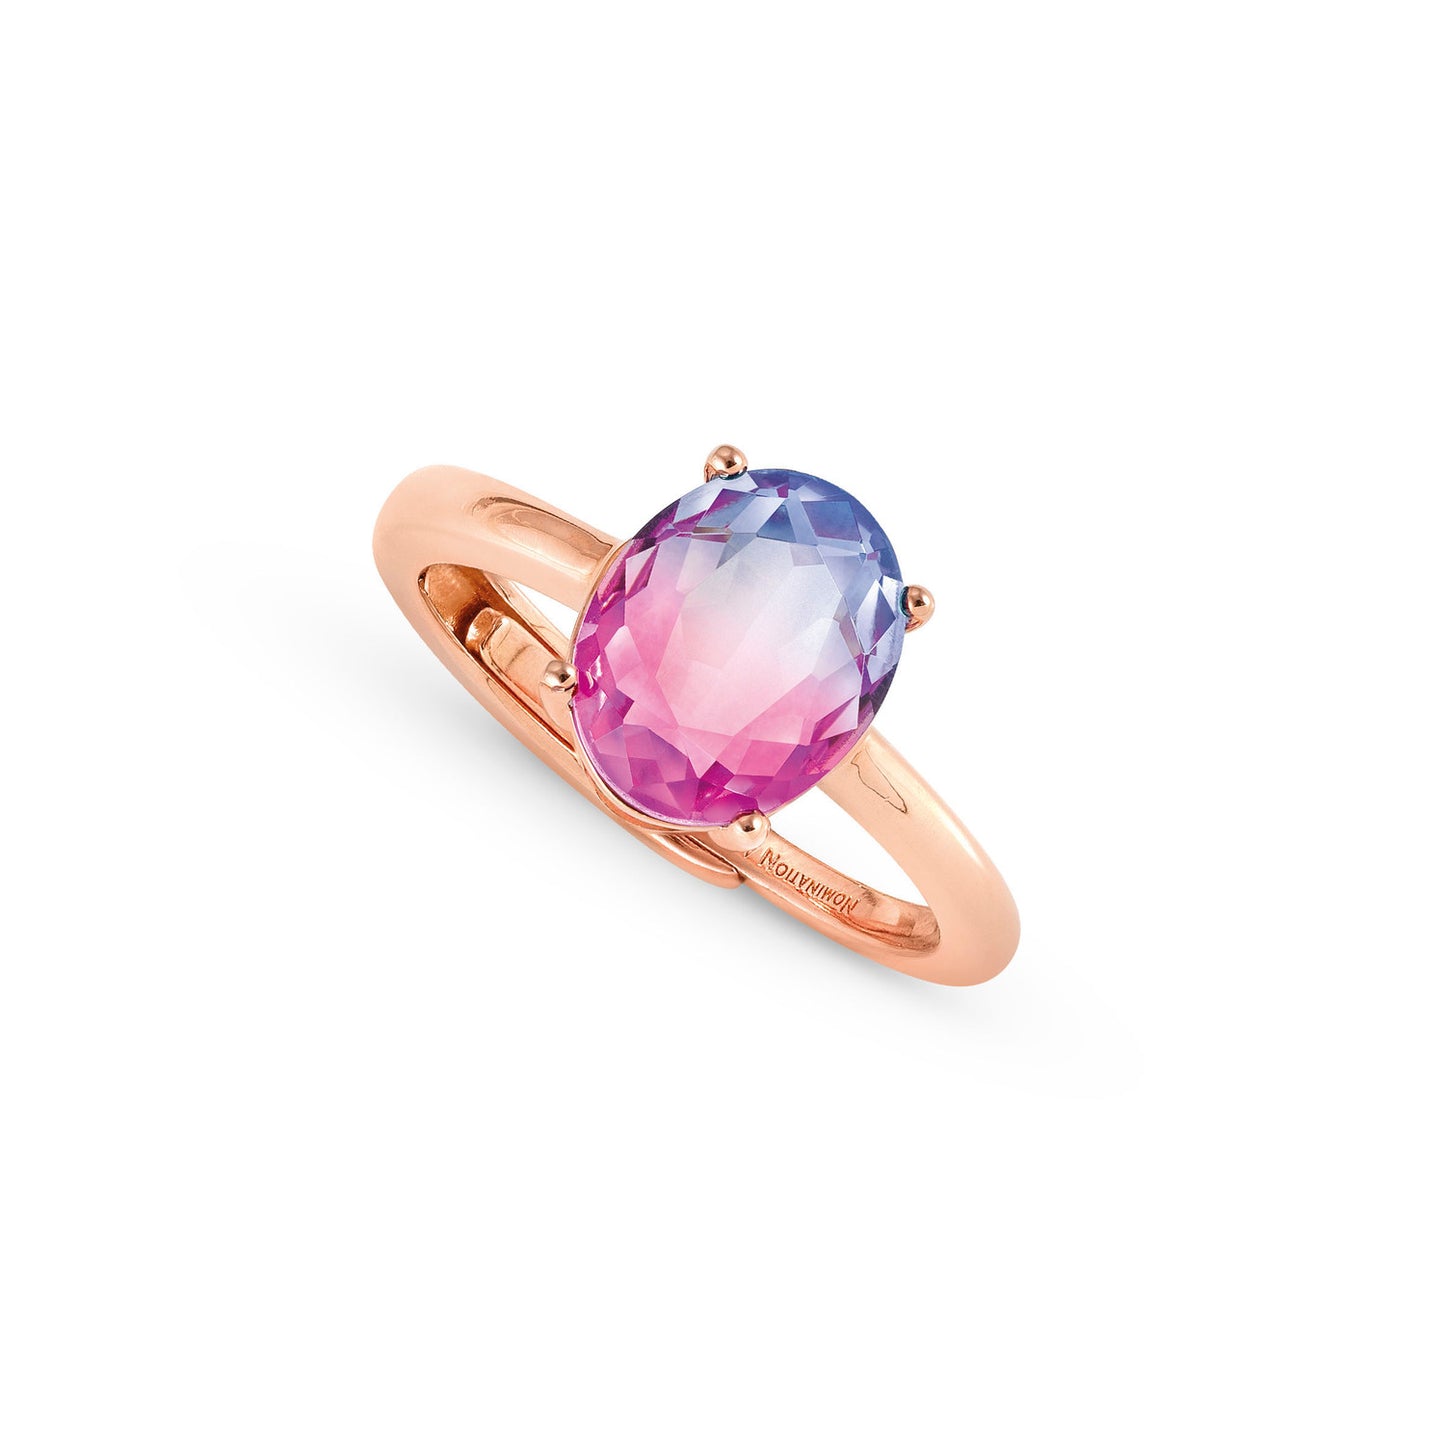 240800/030 SYMBIOSI ring in 925 sterling silver and BICOLOR stones (030_PINK-PURPLE fin, Pink gold)